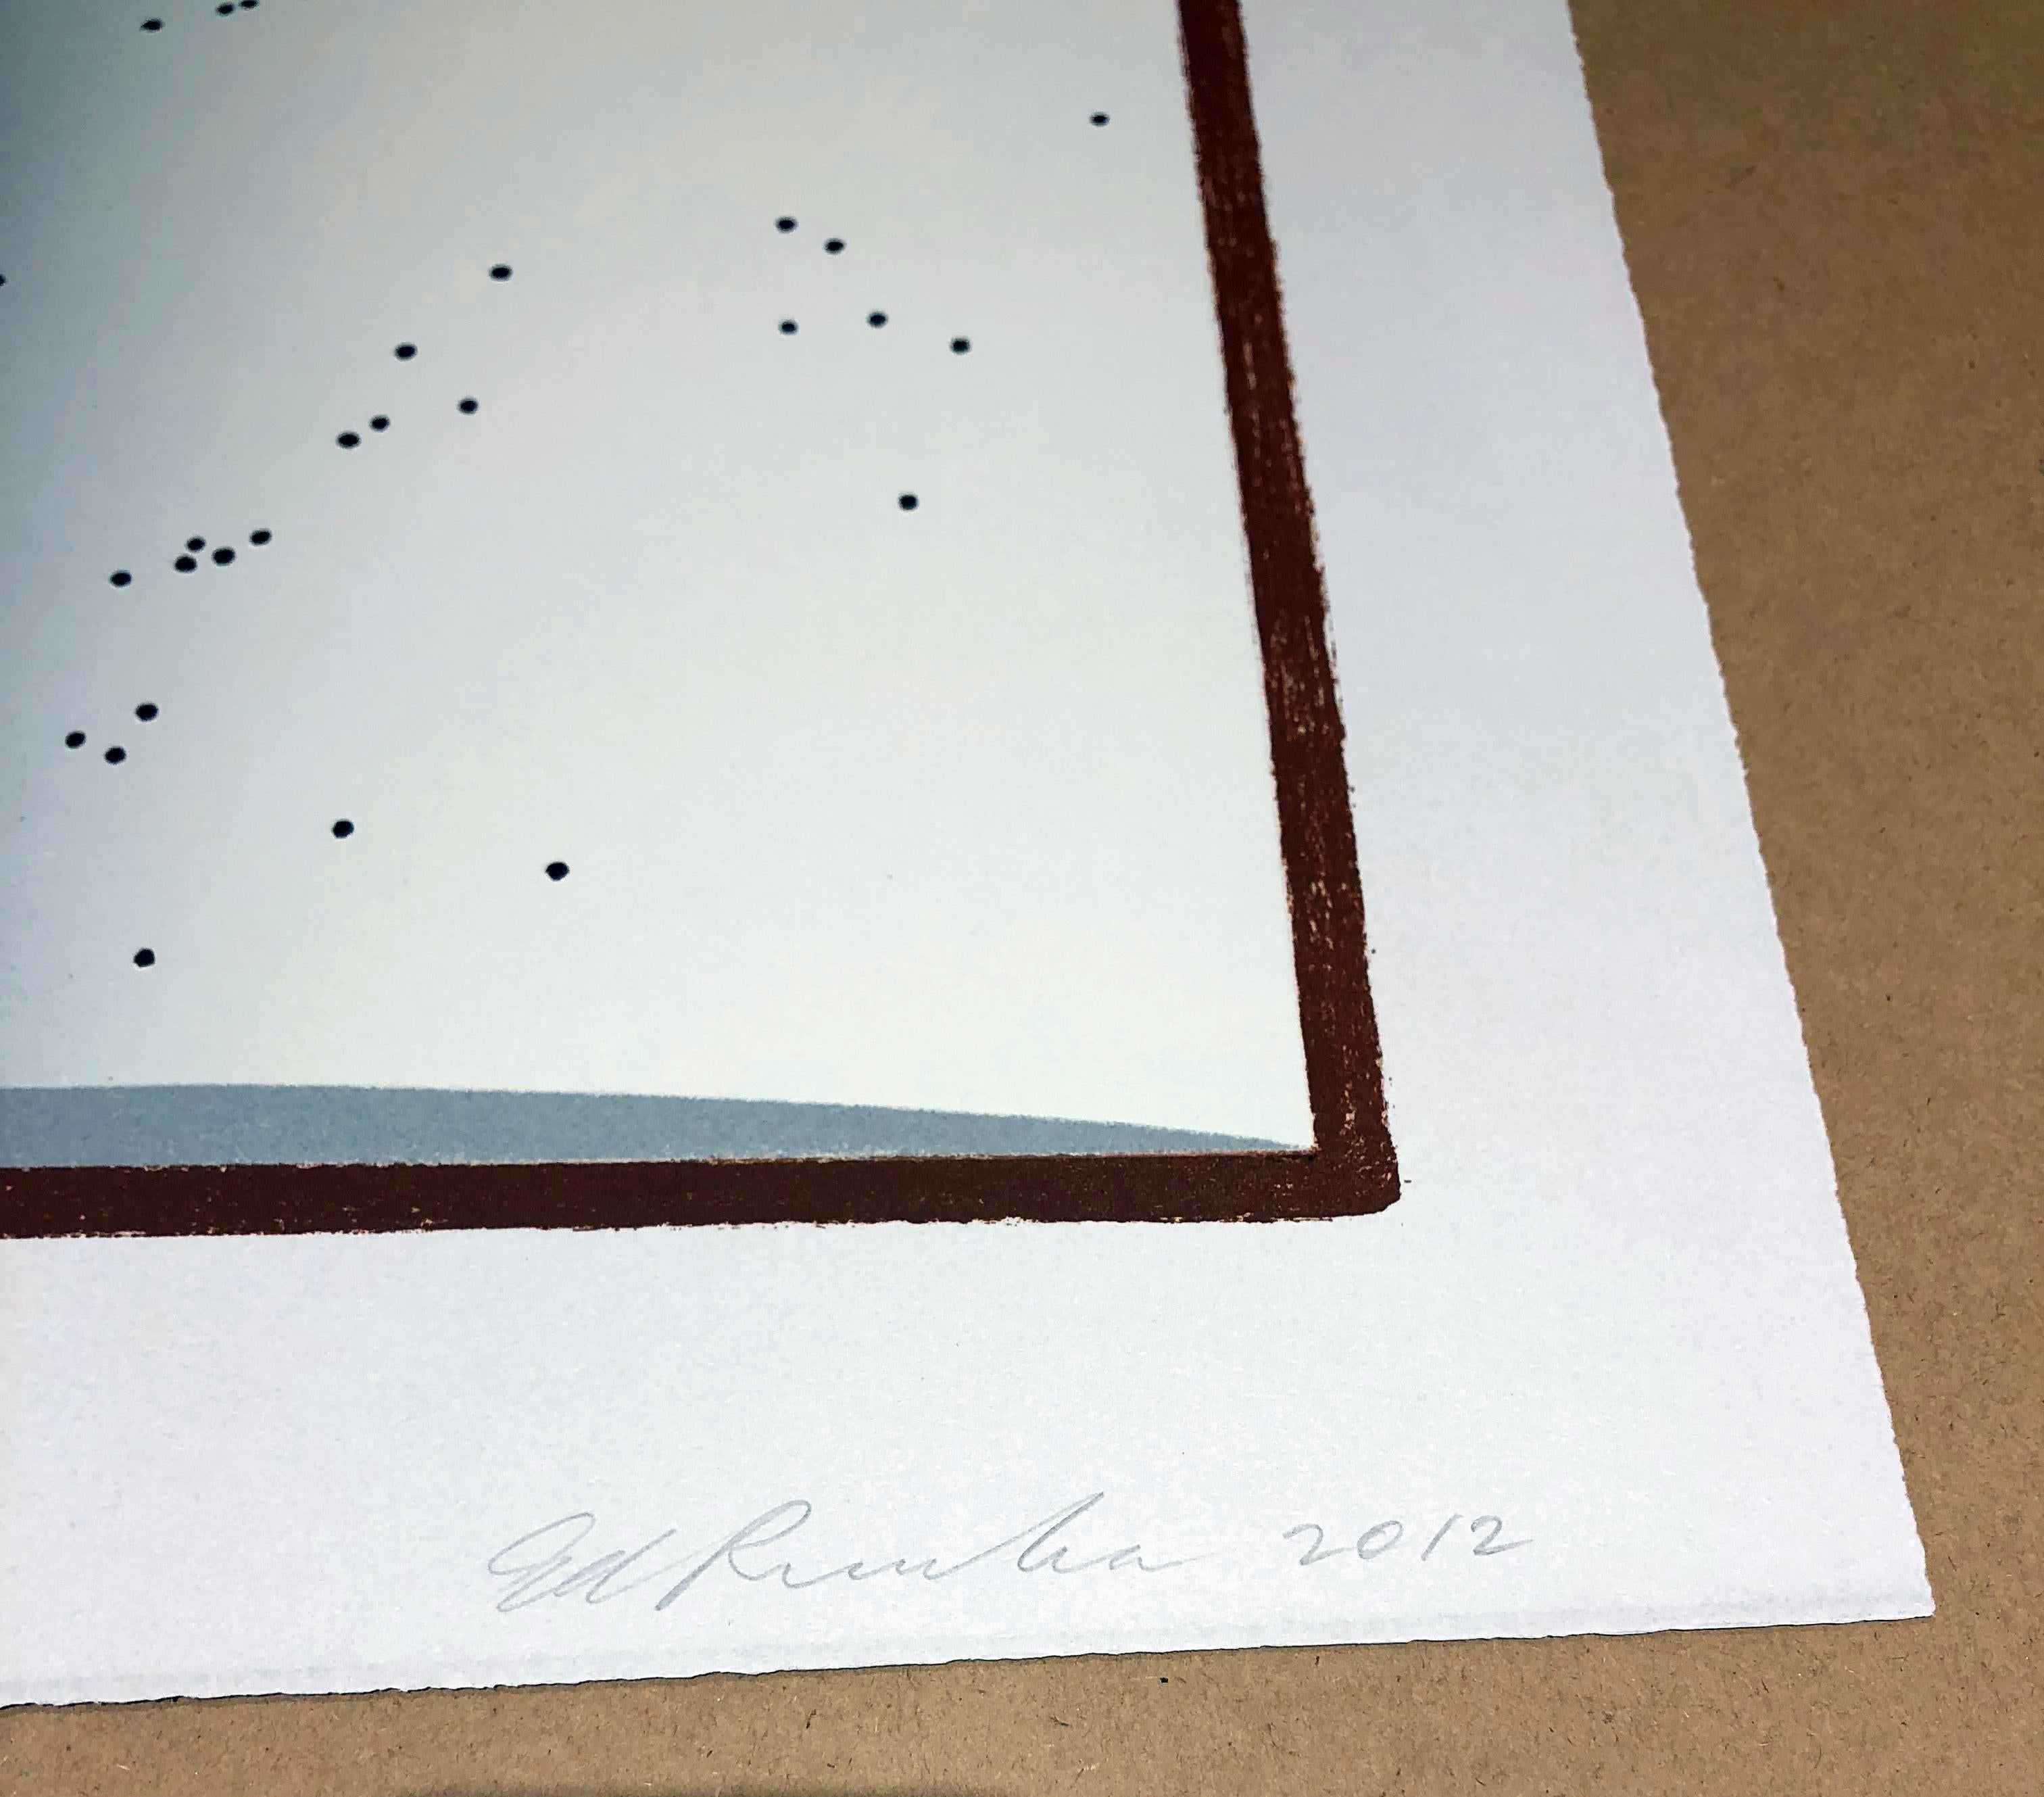 Ed Ruscha
Open Book With Worm Holes
2012; Lithograph
17 x 23 1/4 inches
Edition of 90
Signed
Unframed